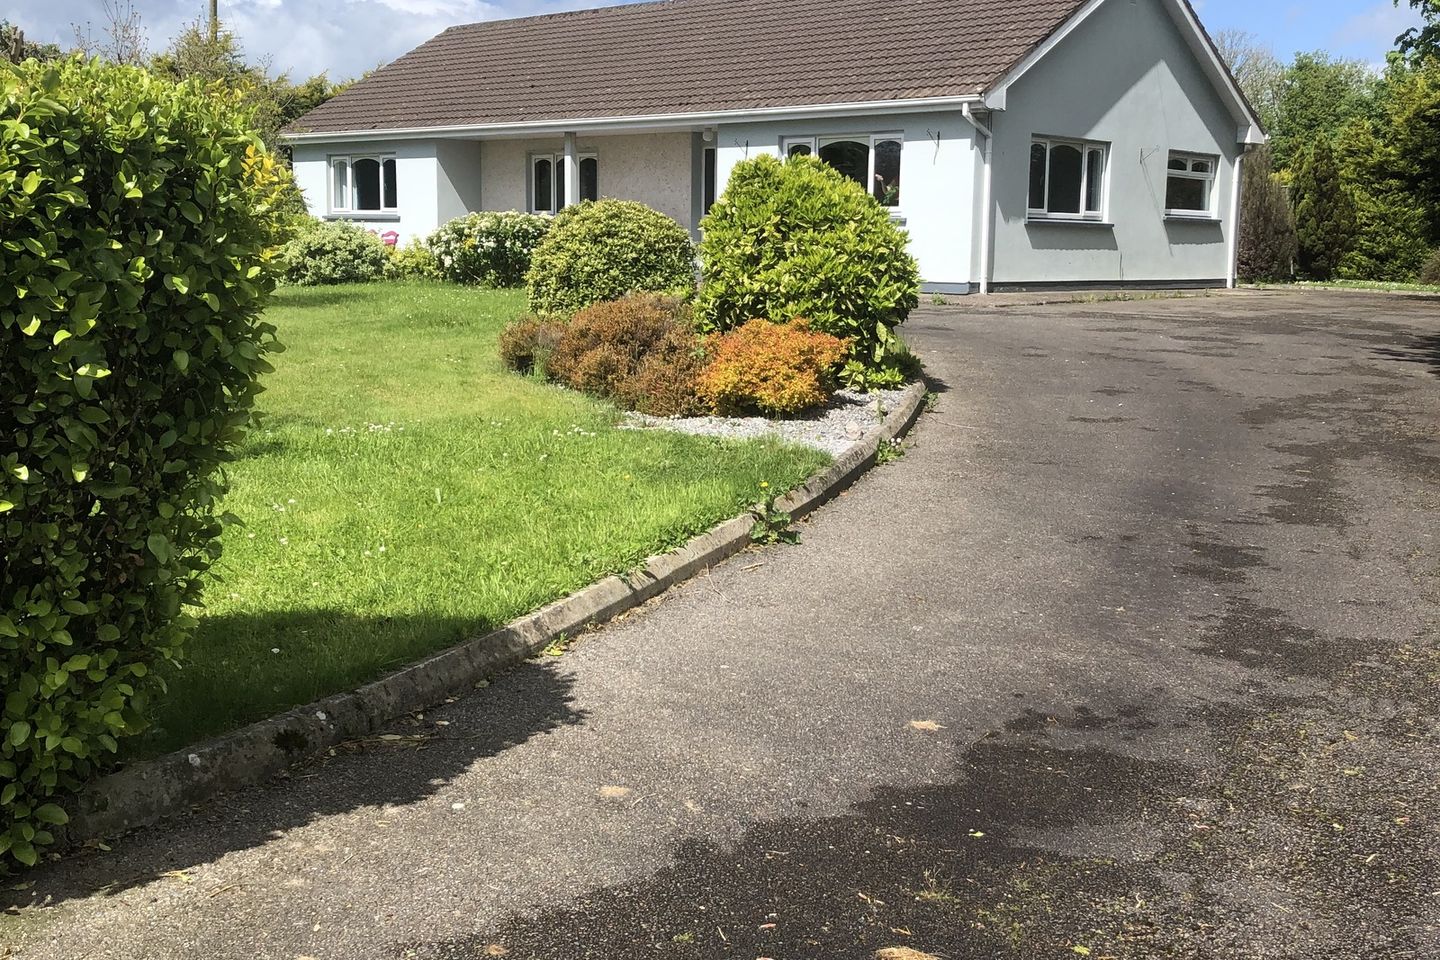 Killeenagh South, Knockanore, Co. Waterford, P51E0F1